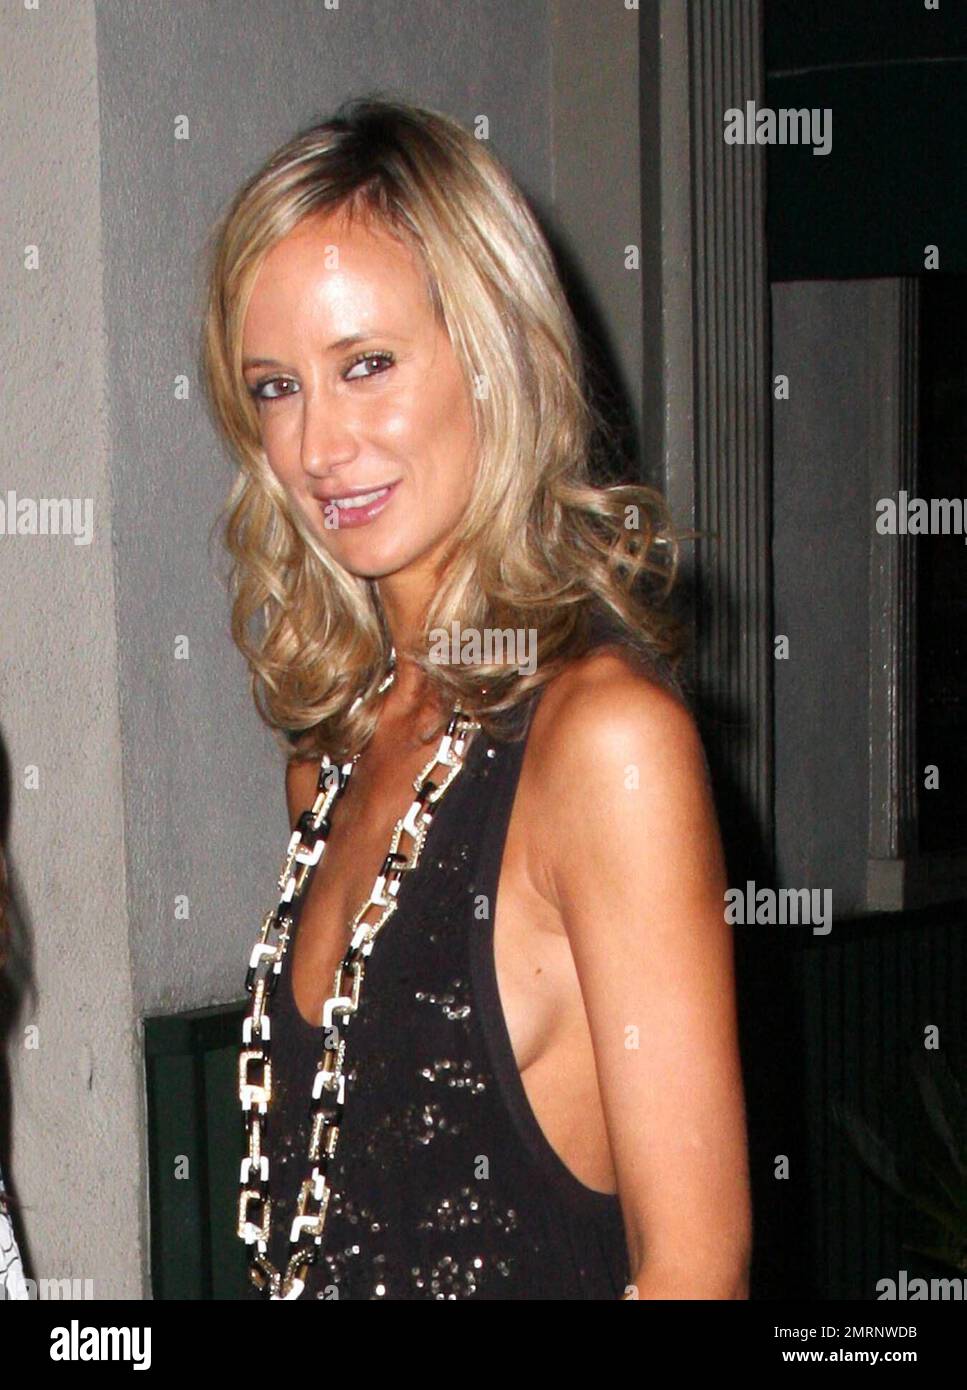 Exclusive!! Lady Victoria Hervey leaves popular steak restaurant The Palm.  The UK 'It Girl' showed off more than she intended in a skimpy black dress after dining with friends at the West Hollywood eatery.  Los Angeles, CA 8/30/08 Stock Photo